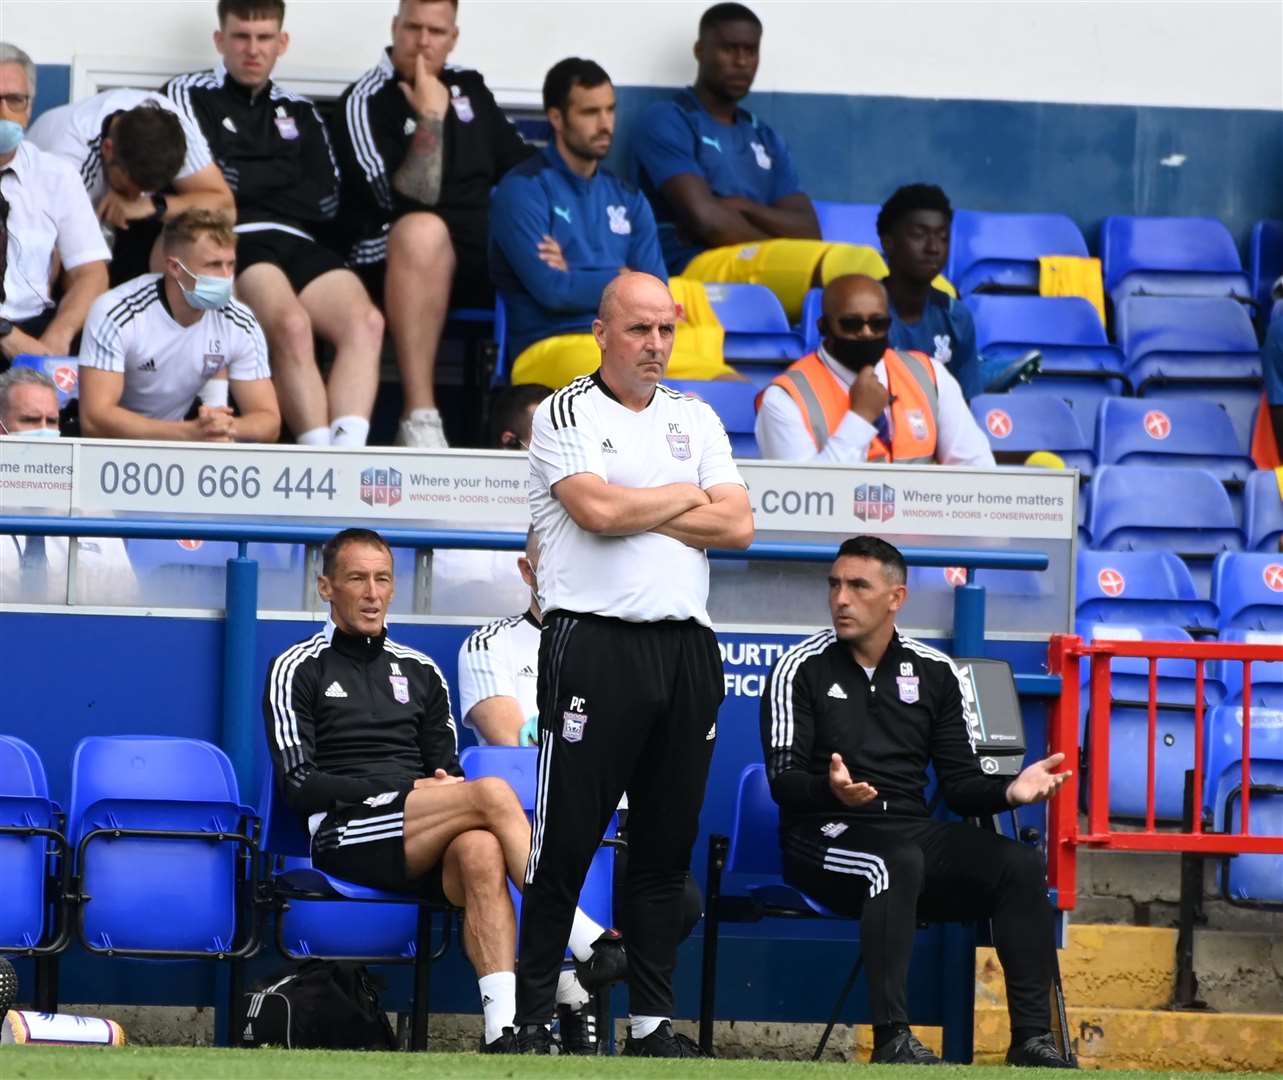 It's been all-change for Ipswich this summer under Paul Cook Picture: Barry Goodwin